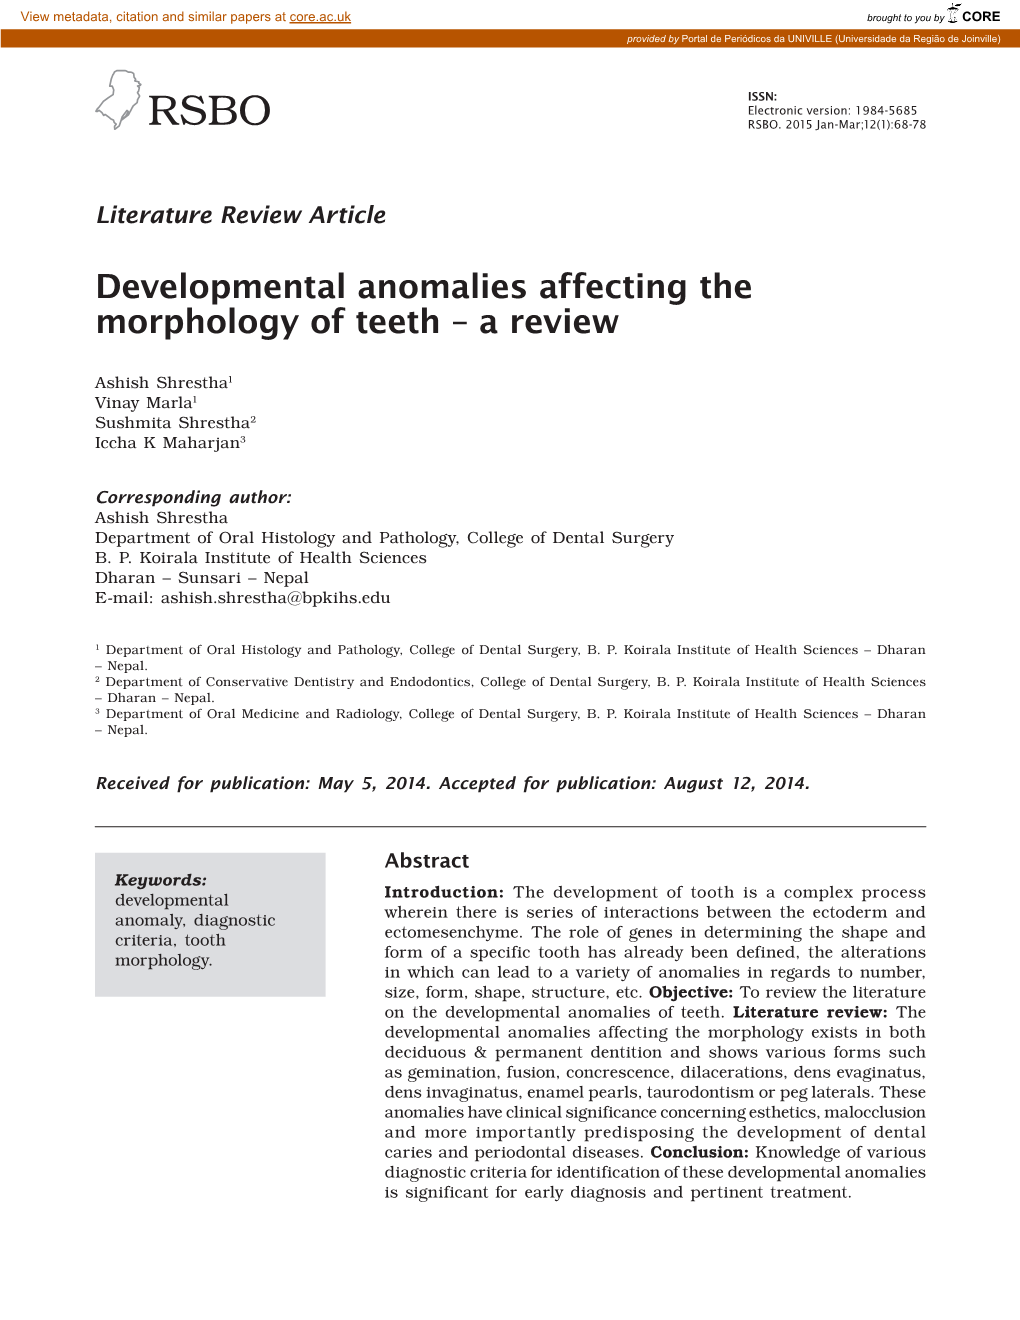 Developmental Anomalies Affecting the Morphology of Teeth – a Review